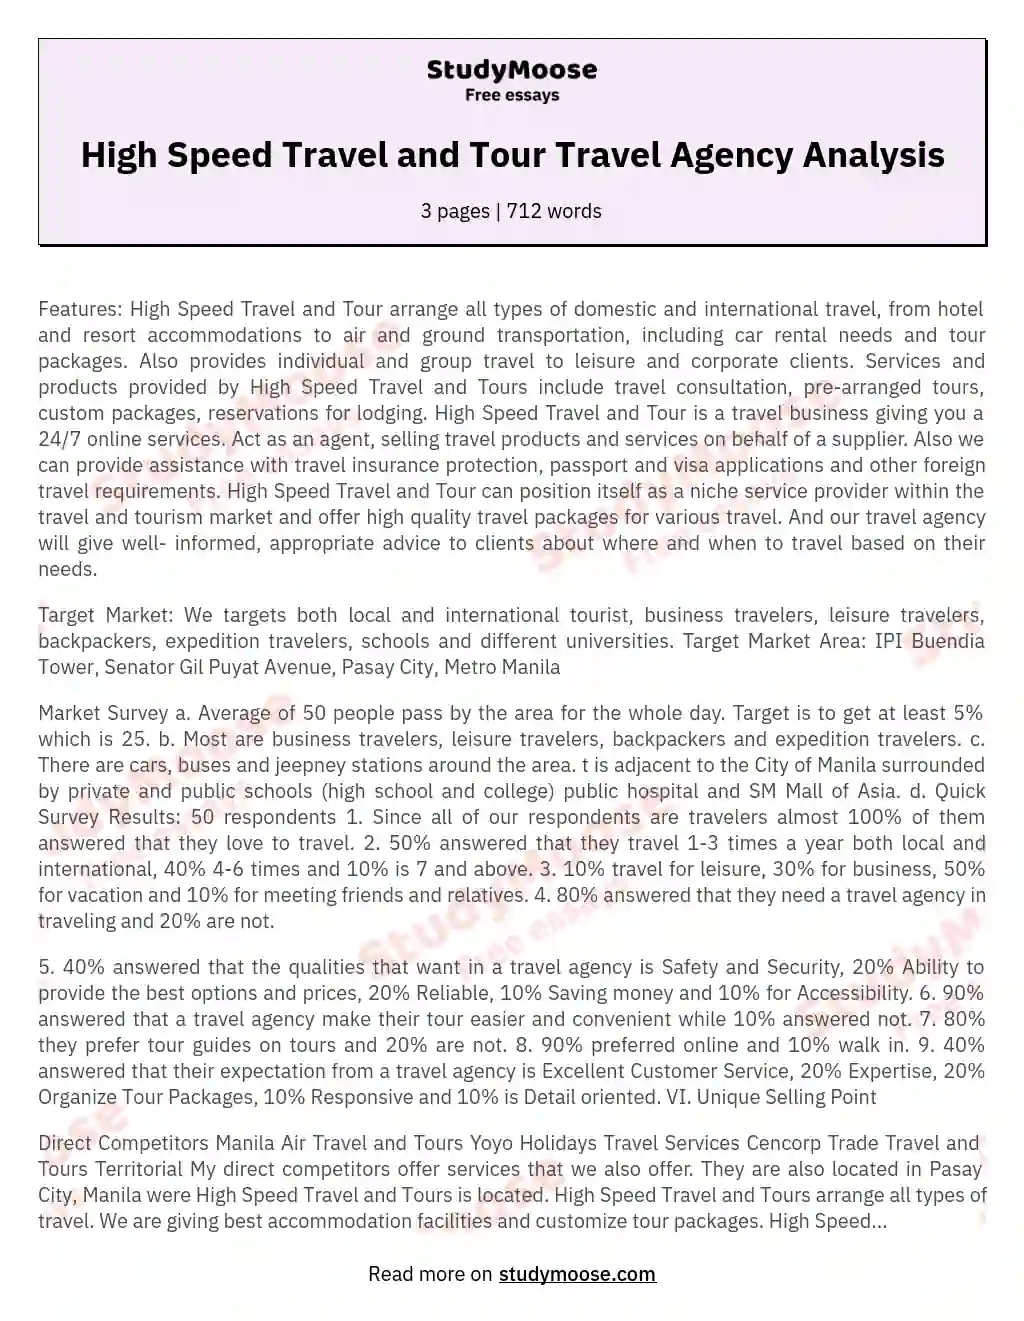 High Speed Travel and Tour Travel Agency Analysis